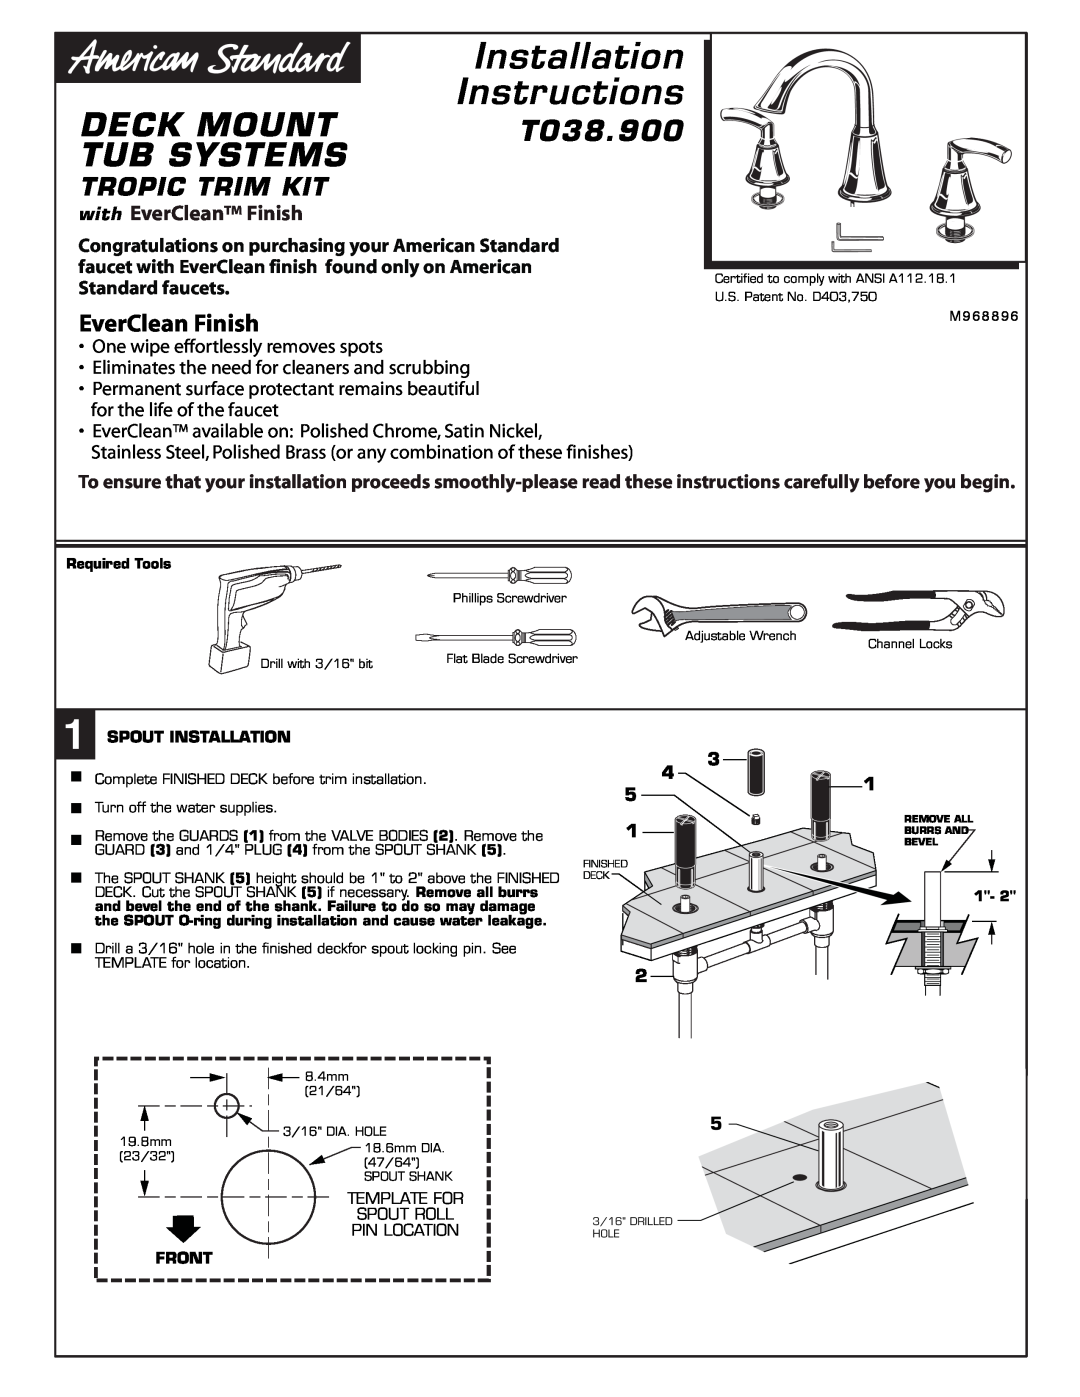 American Standard T038.900 installation instructions Deck Mount, Tub Systems, EverClean Finish, Installation Instructions 